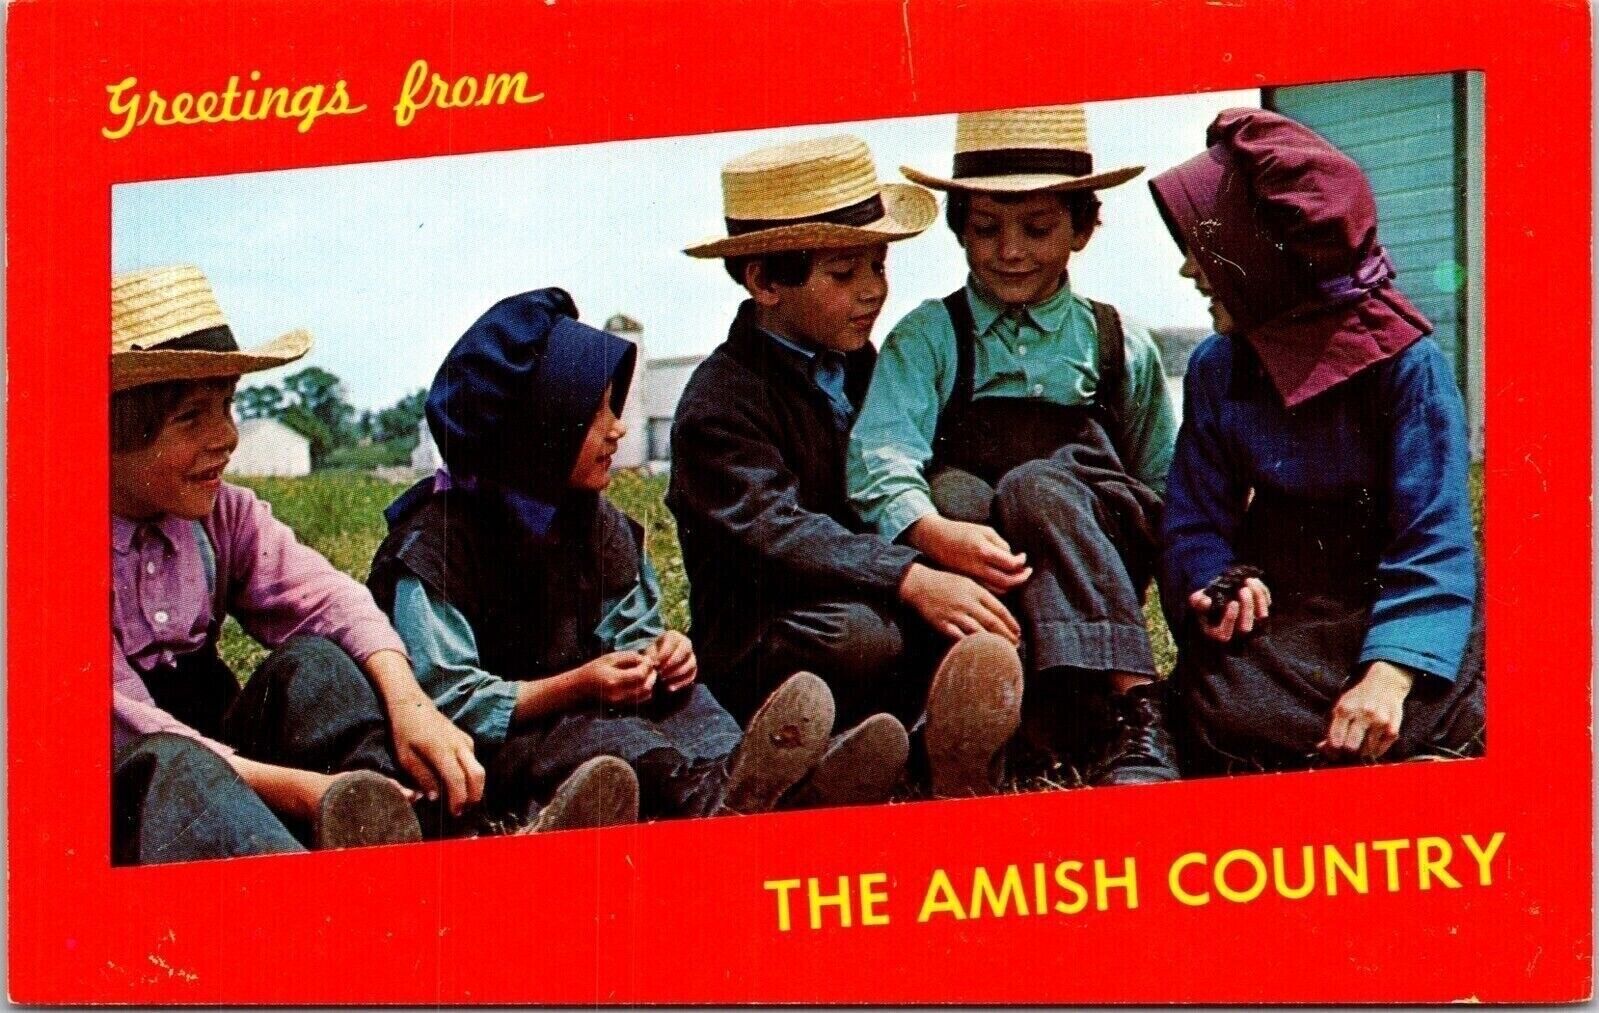 Greetings Amish Country Amish Religious Sect Lancaster Pennsylvania Pa Postcard